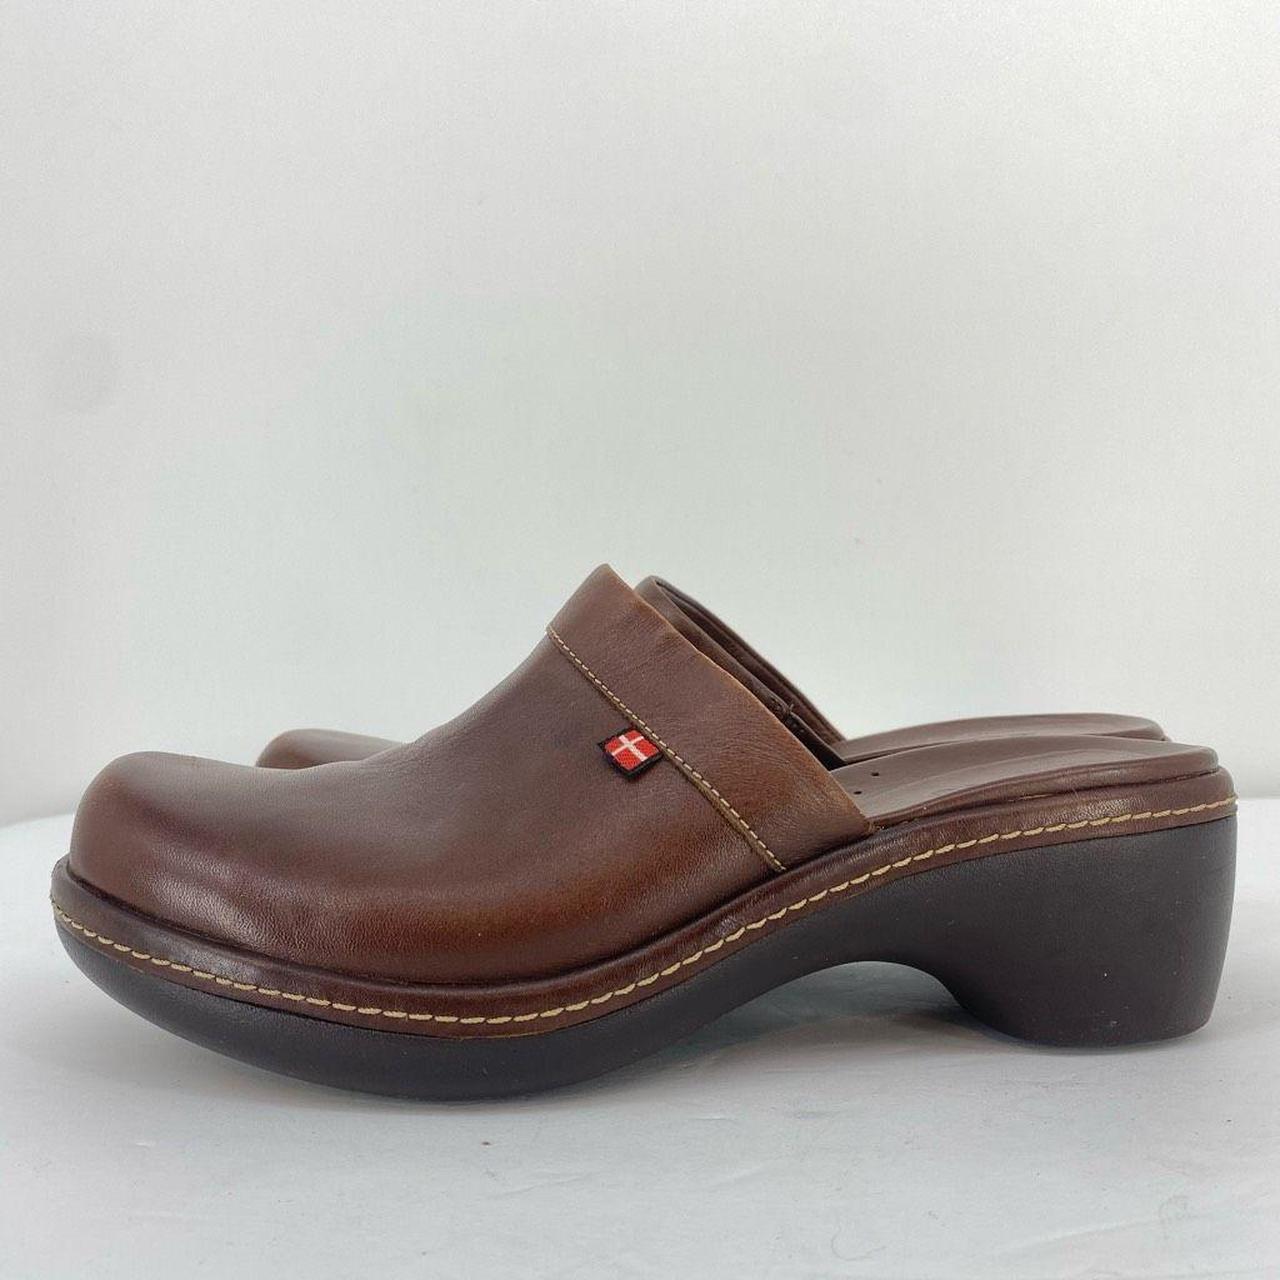 Comfort Mules & Clogs for Women